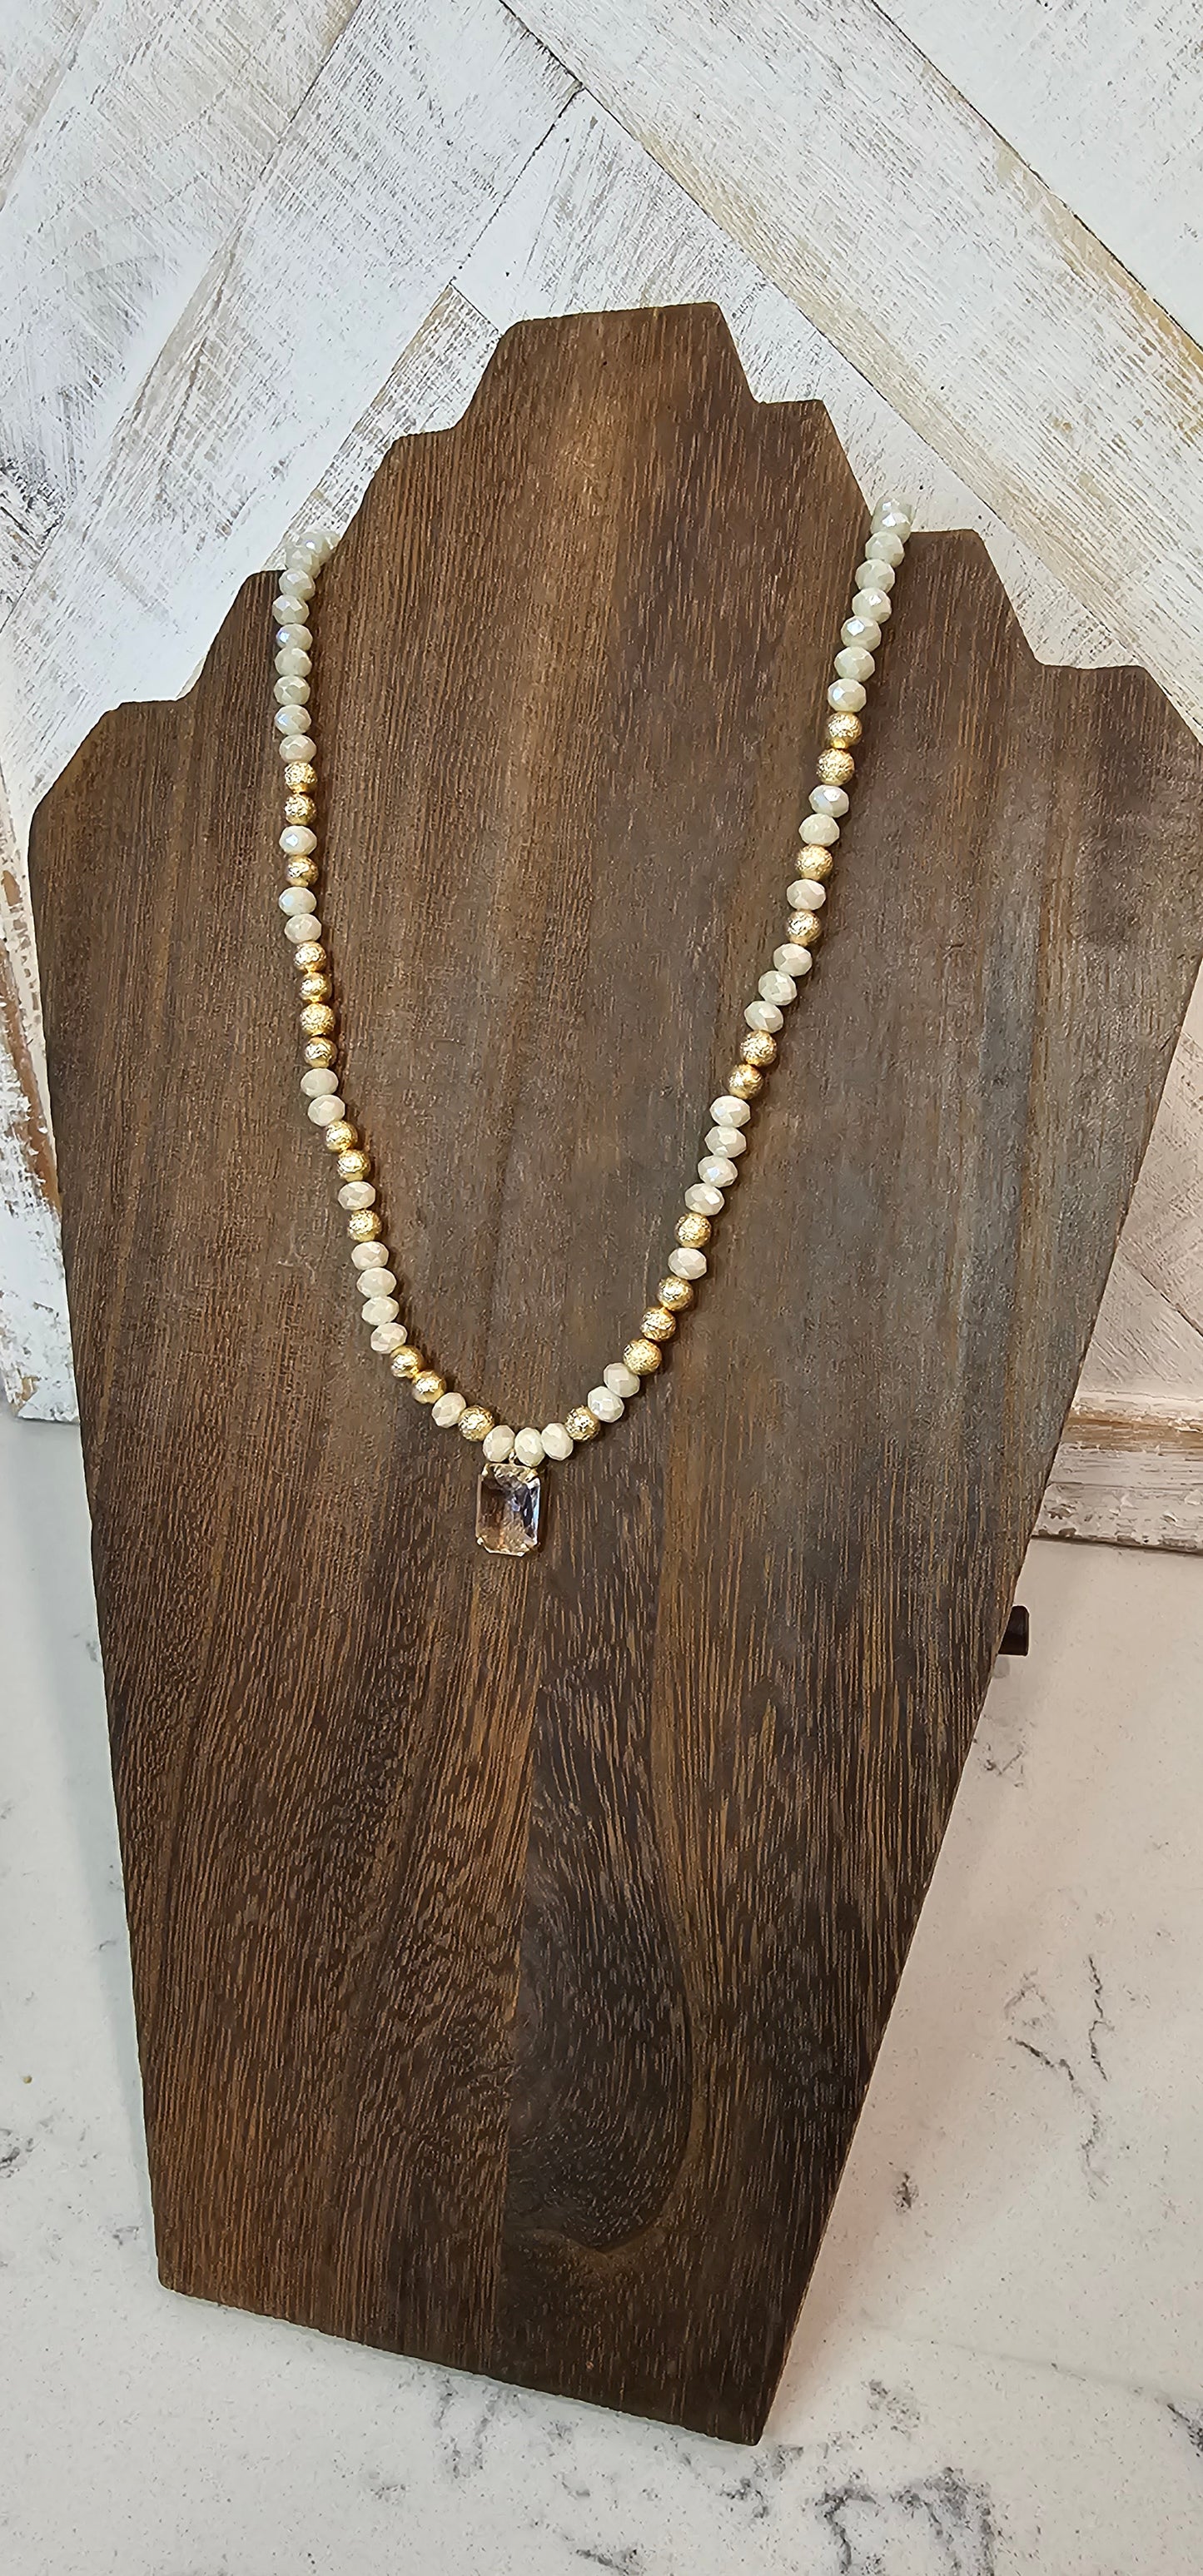 Adjustable chain Color: Gold link chains with ivory & gold beads, clear crystal Limited supply!  